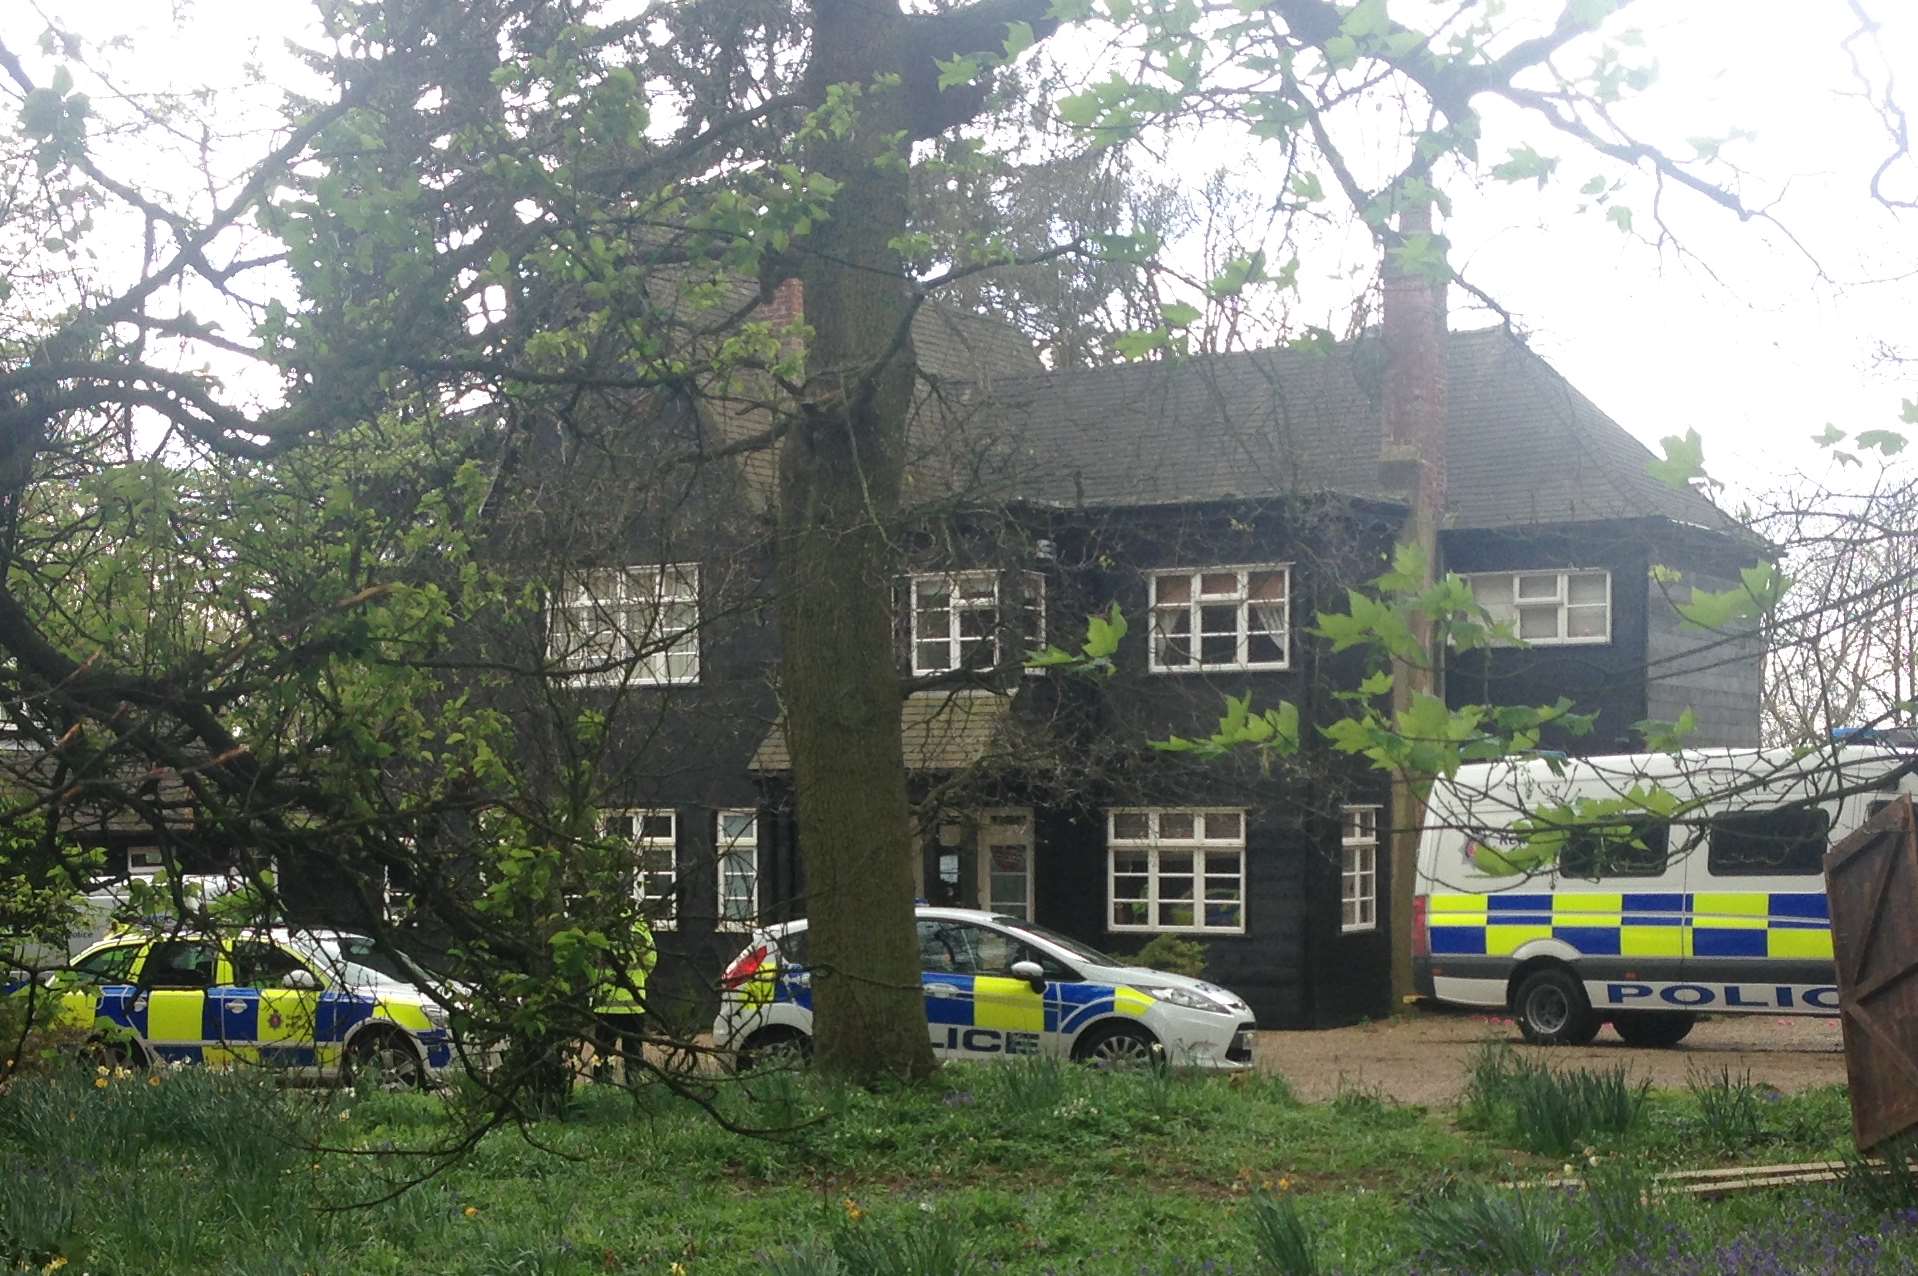 Police vehicles at Peaches Geldof's house after her death. Picture: Kiran Kaur